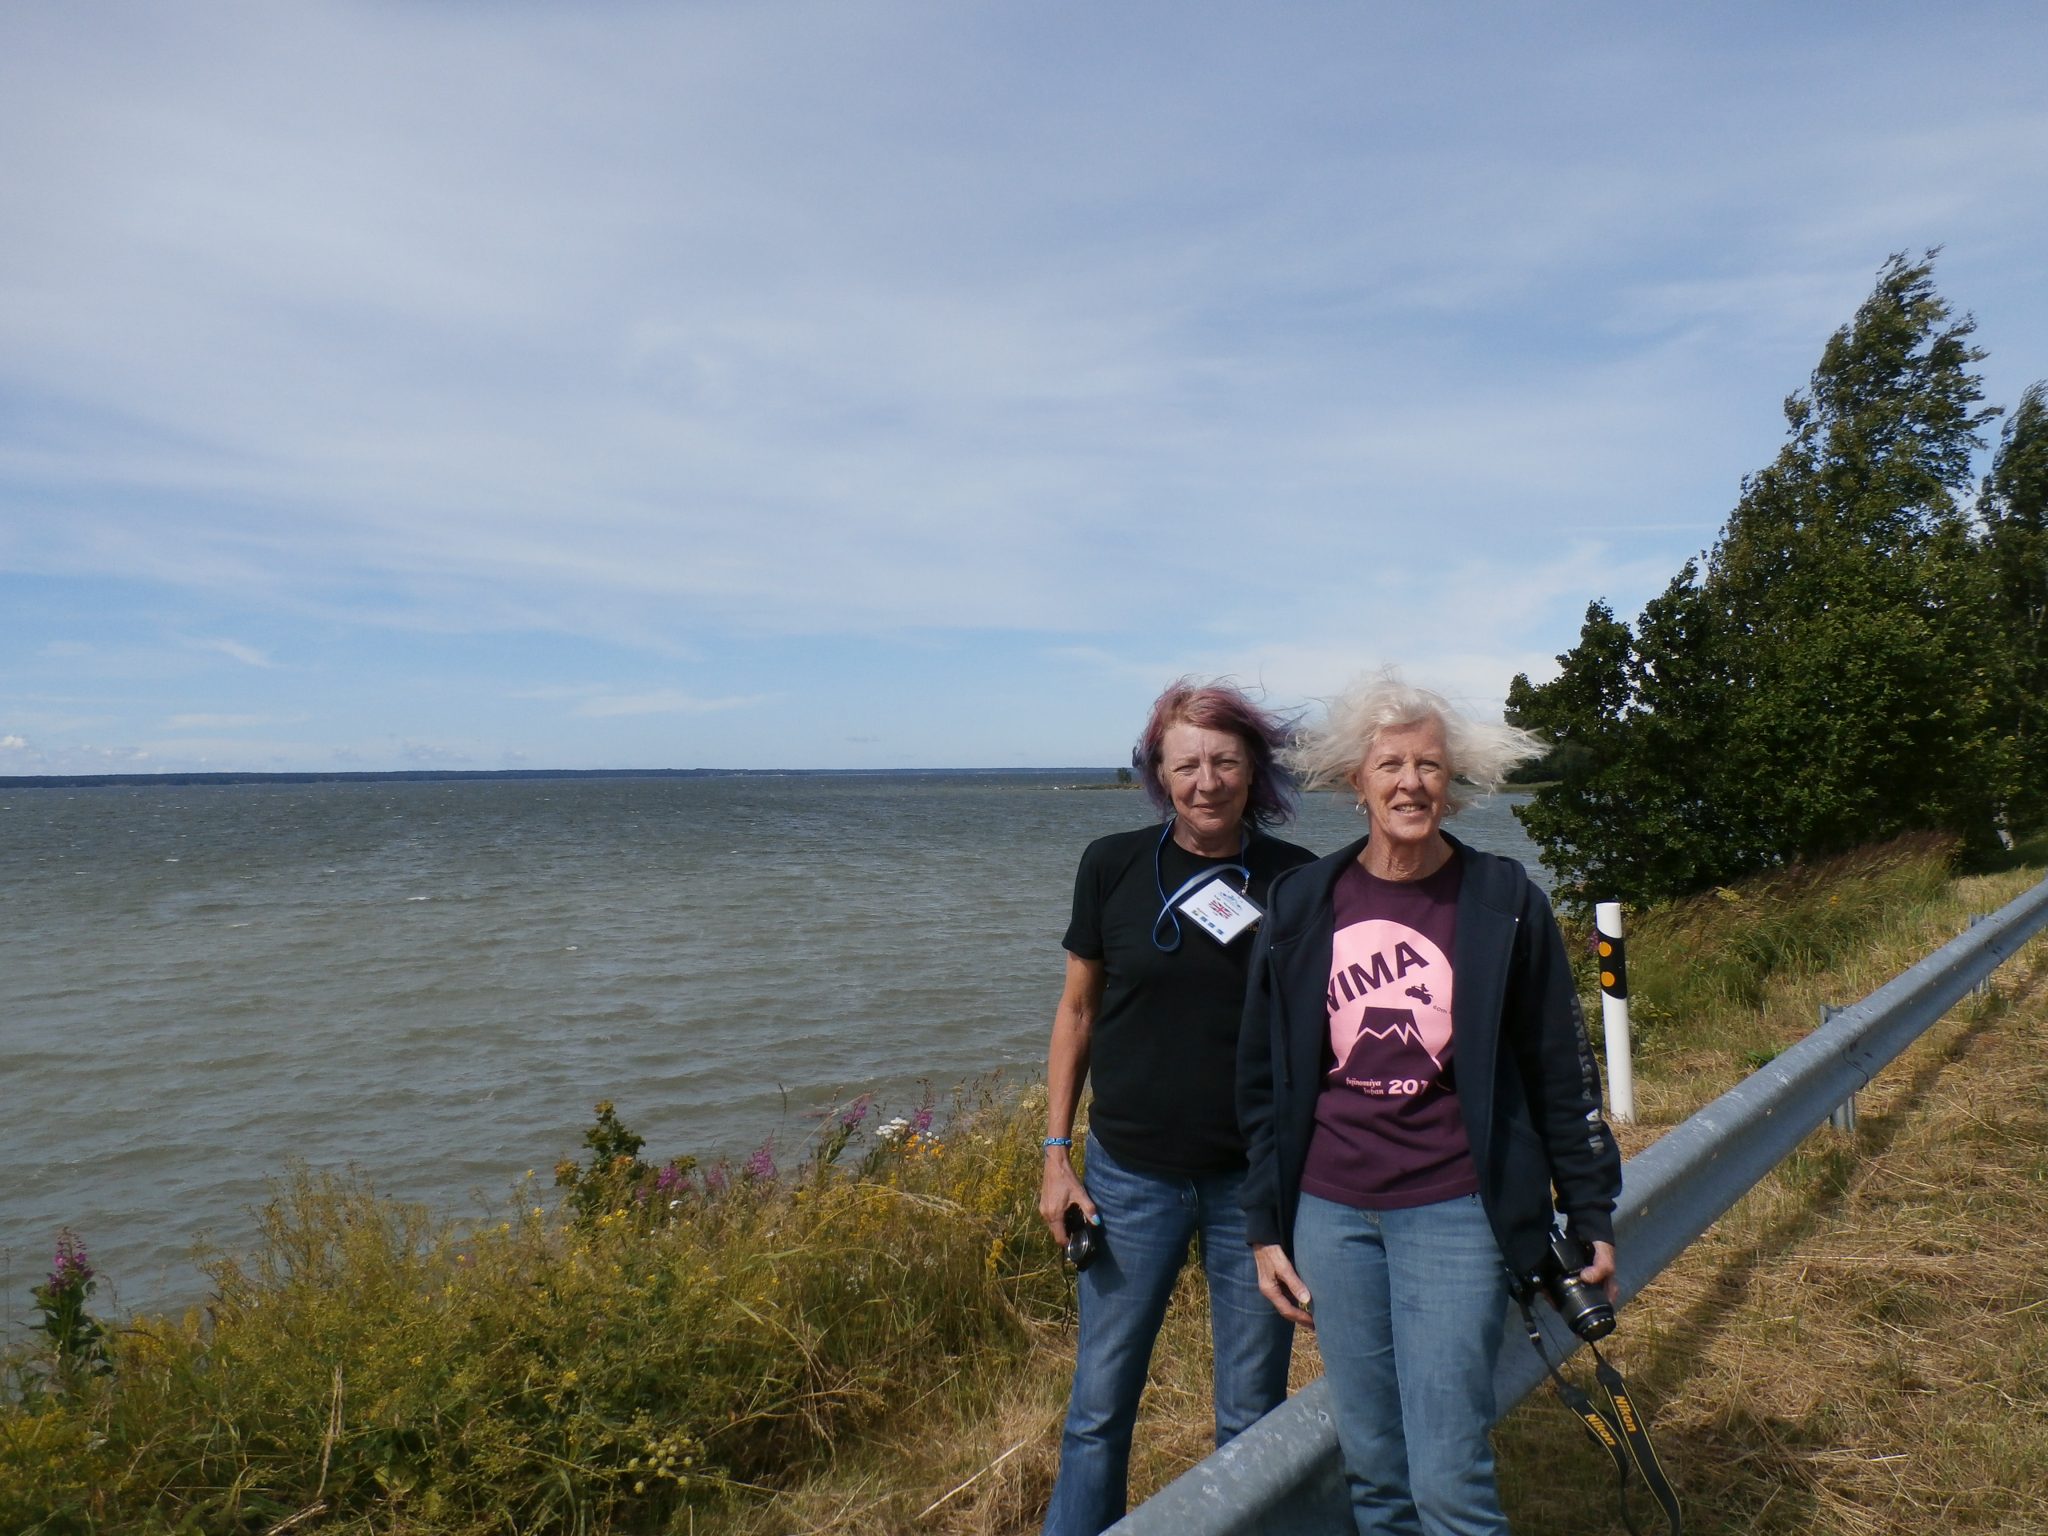 Liv and Val - my team for the treasure hunt. We had an excellent day trying to be clever and resisting the temptation of googleling the questions. The countryside in the north west of Estonia is beautiful, and as you can see - the weather was windy :)